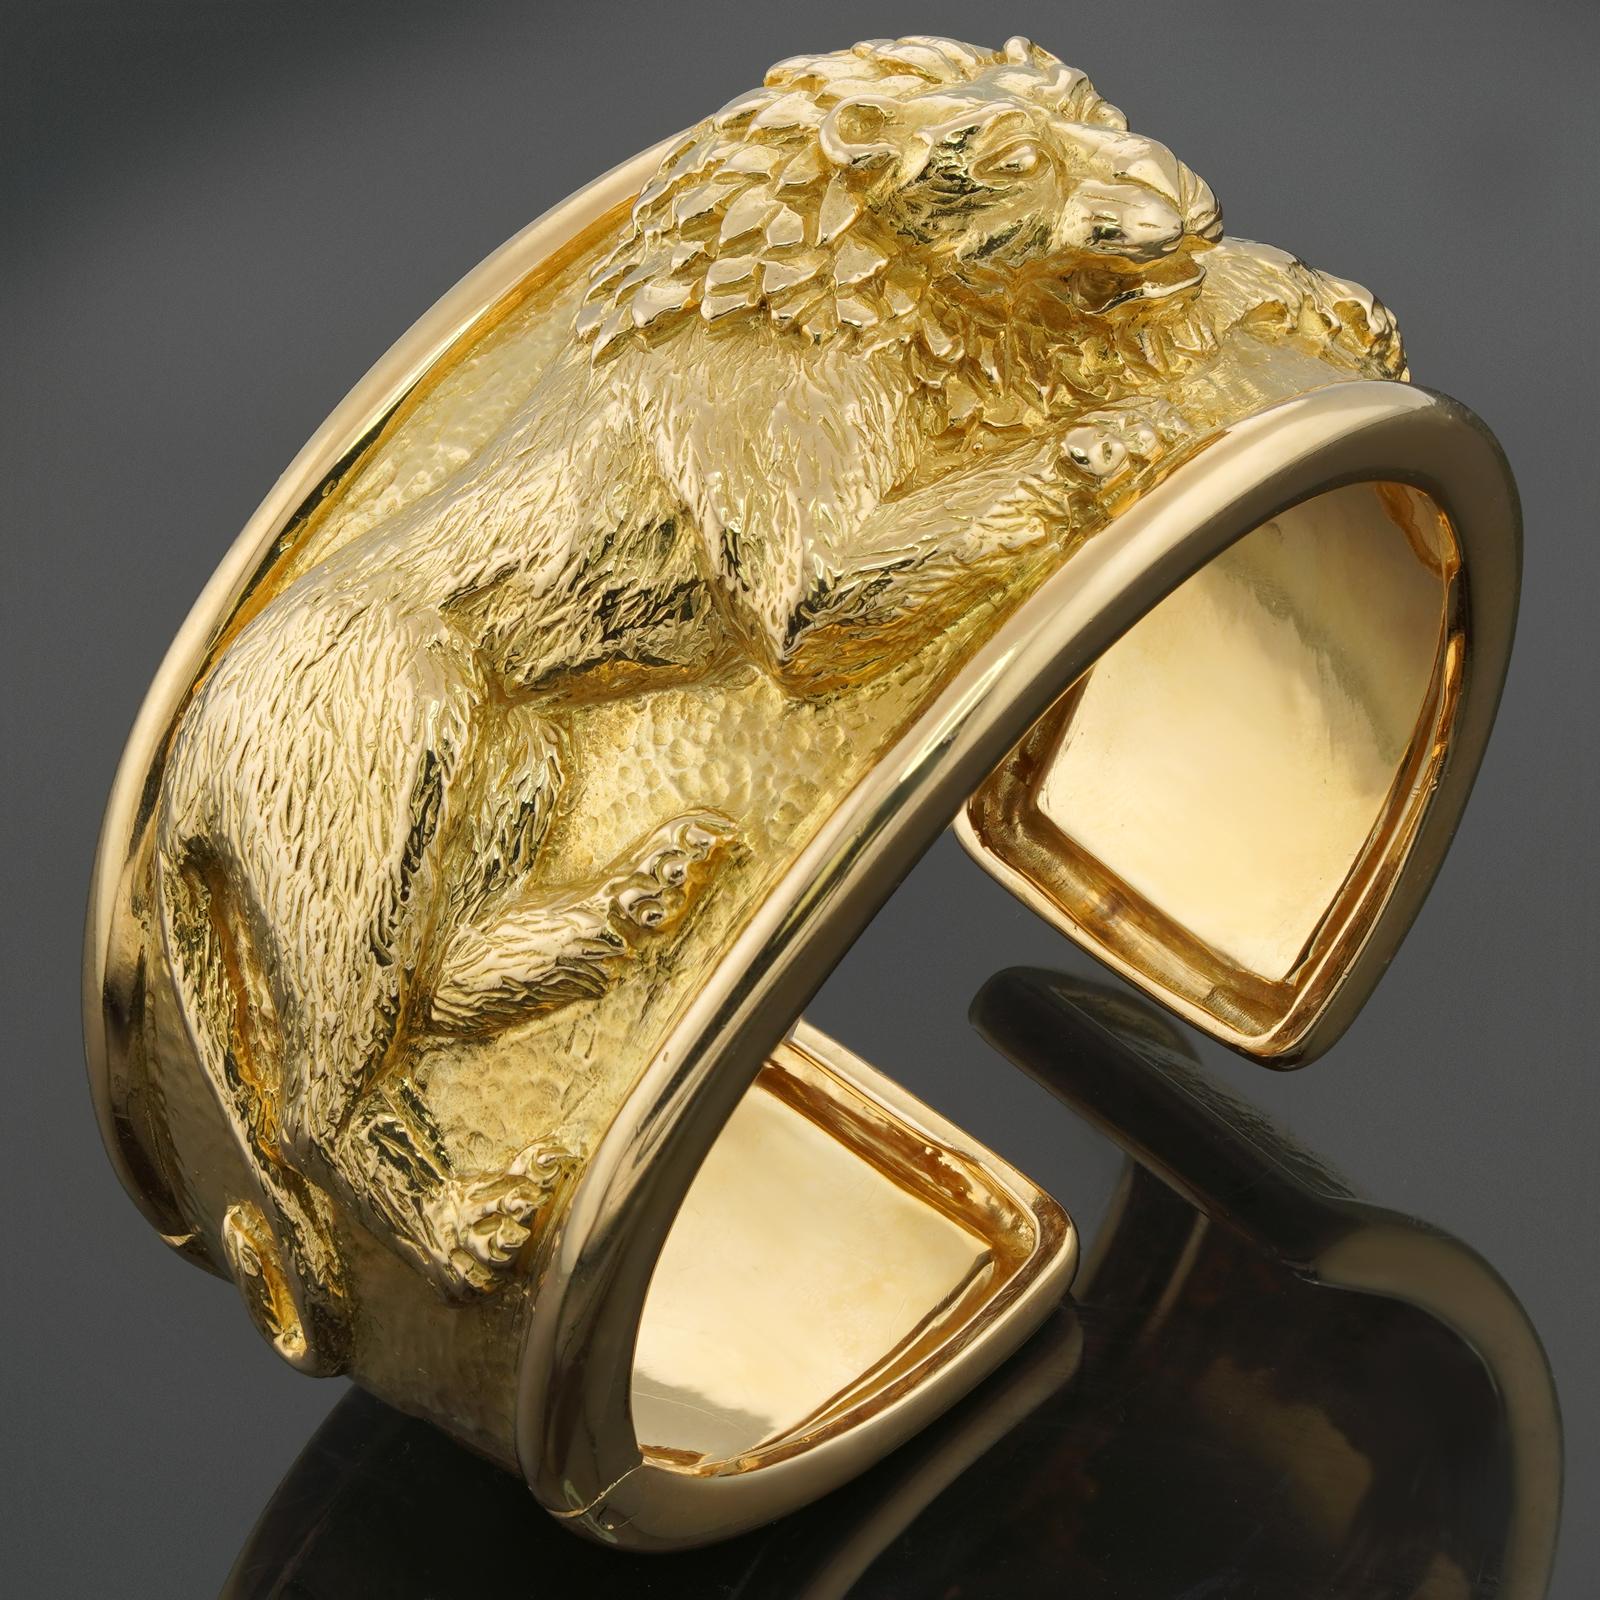 This authentic timeless David Webb cuff bracelet features a lion motif crafted in polished and hammered yellow gold and is completed with a hinged section allowing for comfortable wear. Made in United States circa 1980s. Measurements: 1.53